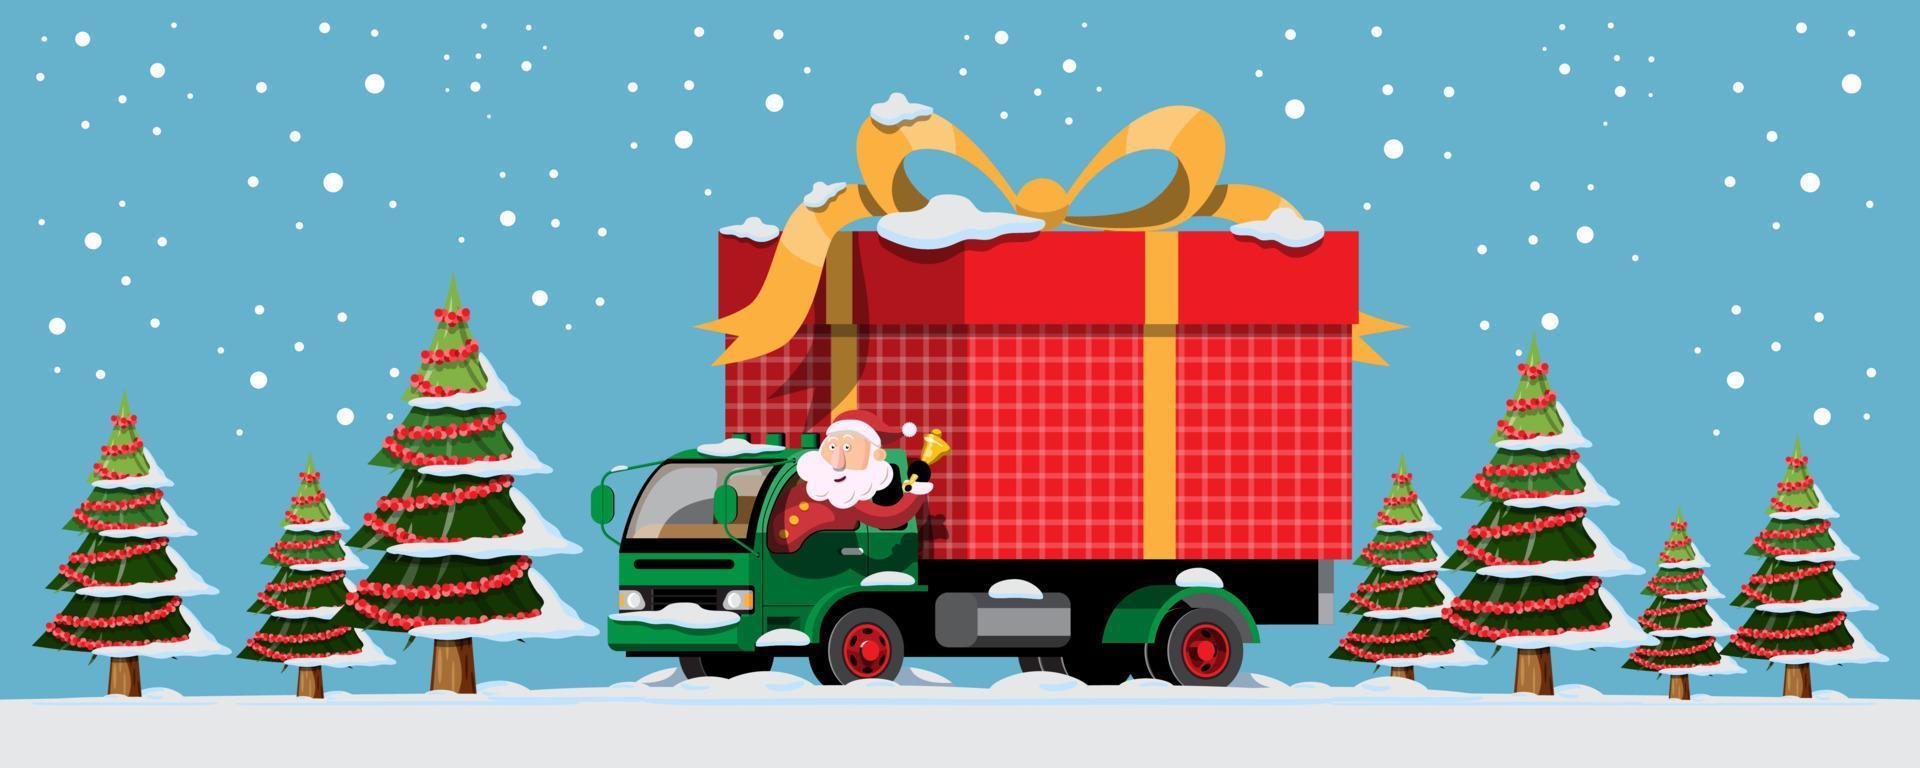 Santa Claus drives a automobile to deliver Christmas presents to children around the world. vector